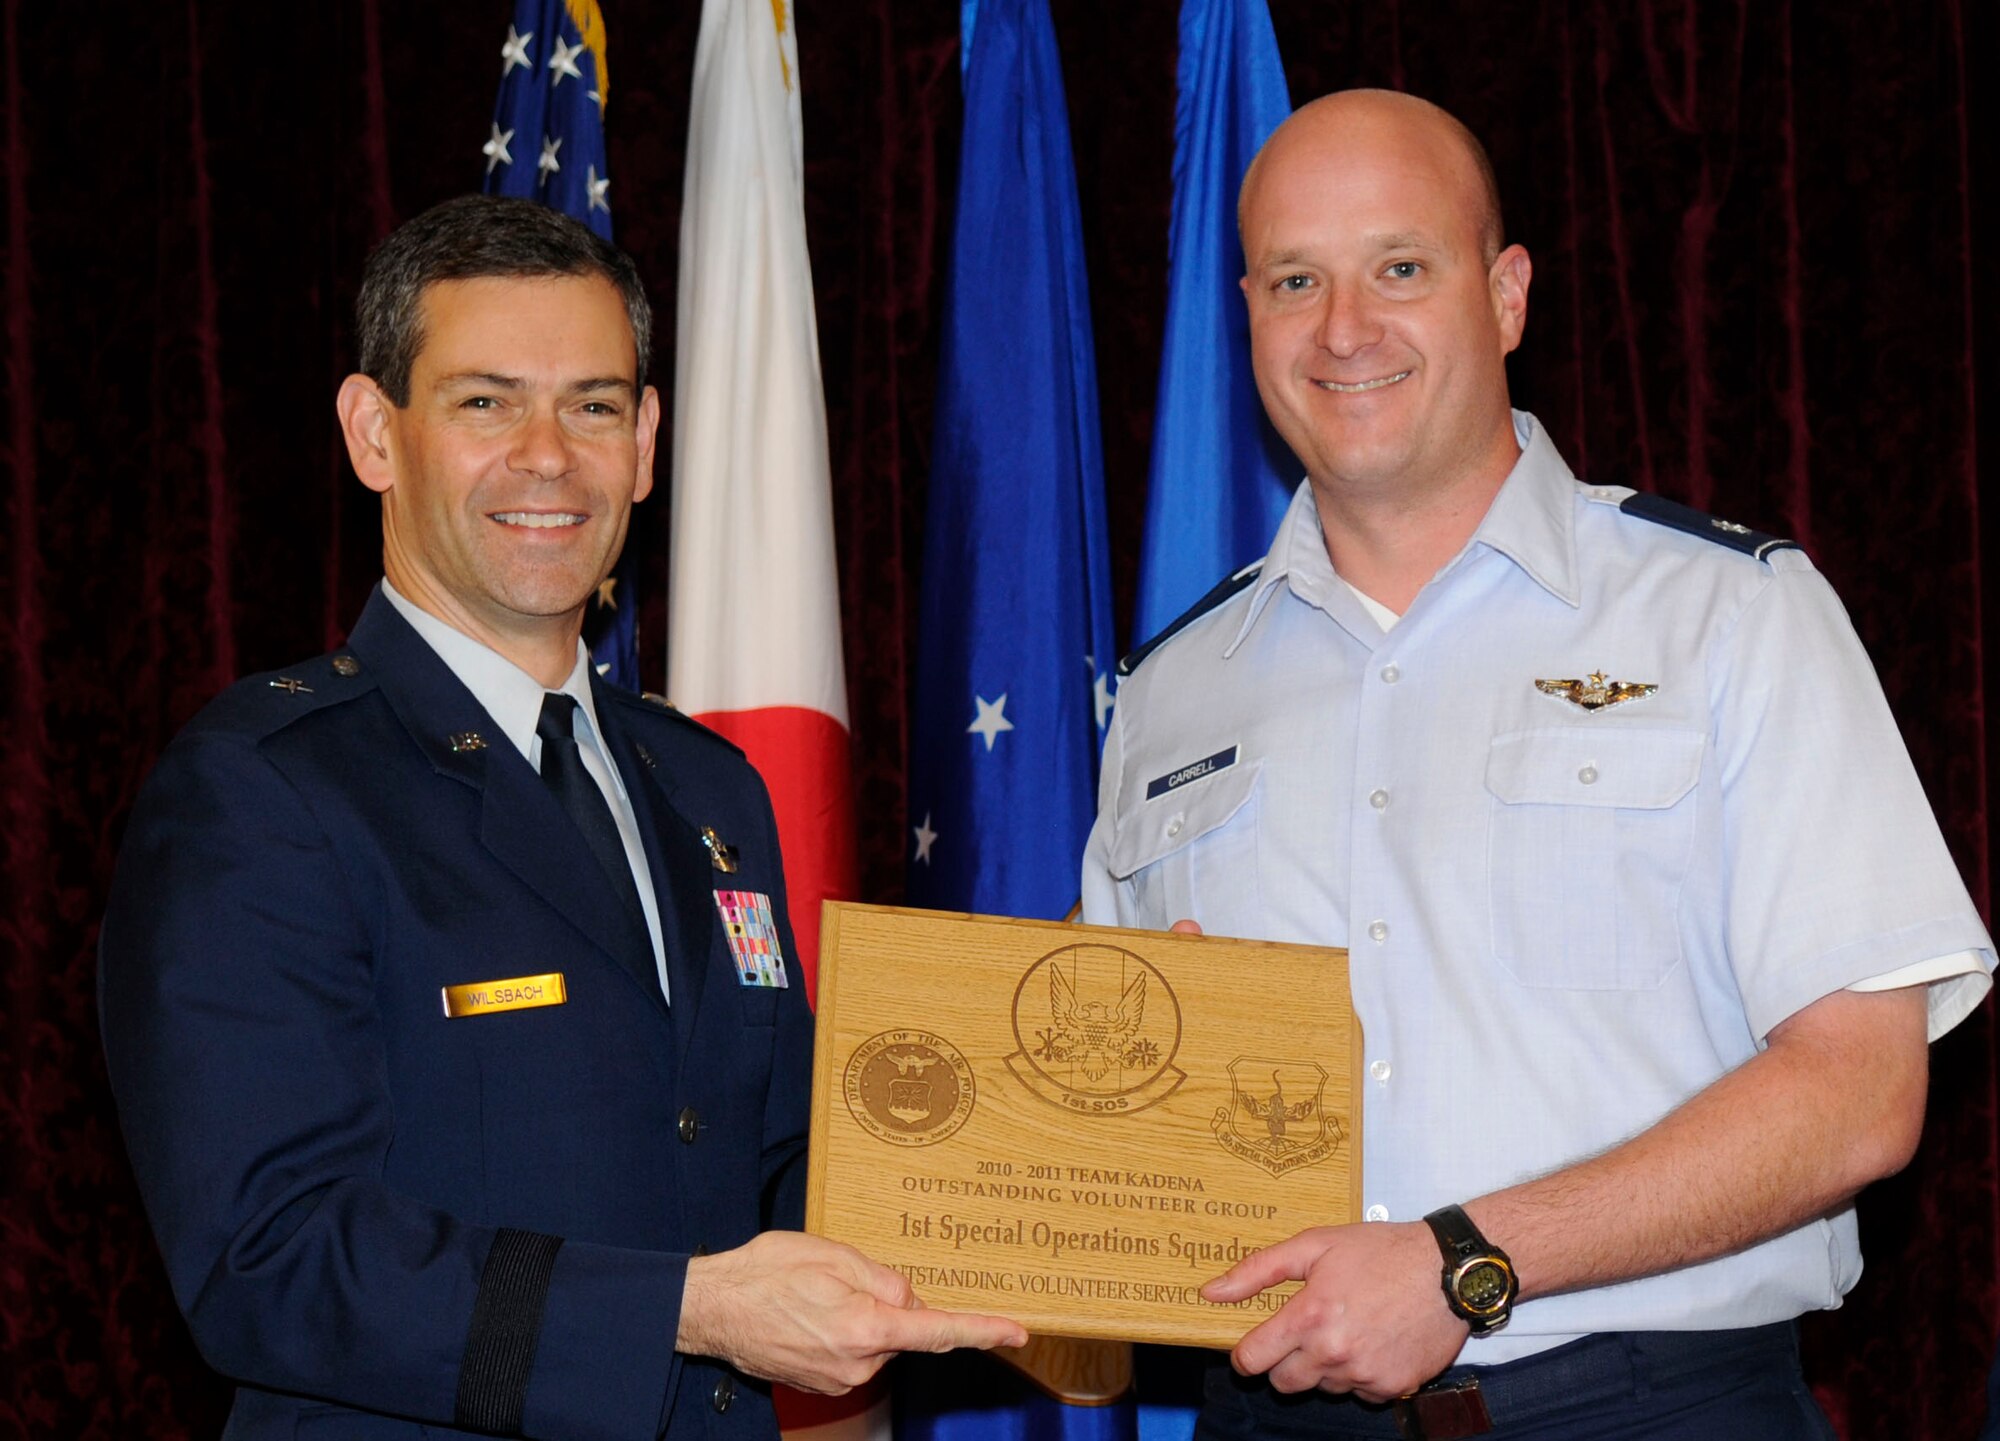 KADENA AIR BASE, Japan -- Lt. Col. Richard Carrell (right), the 1st Special Operations Squadron operations officer, poses for a photo with Brig. Gen. Kenneth Wilsbach, the 18th Wing commander, after being presented Team Kadena's 2010 Angel Award for the Volunteer Unit of the Year at the Kadena Annual Volunteer Recognition Ceremony here April 18.  The 1st supported the Misato Children's Home and multiple orphanages throughout the local community and across the Pacific Theater in 2010 supporting more than 500 children -- nearly 10 times the size of the unit of roughly 50 people. (U.S. Air Force photo by Airman 1st Class Brooke Beers)